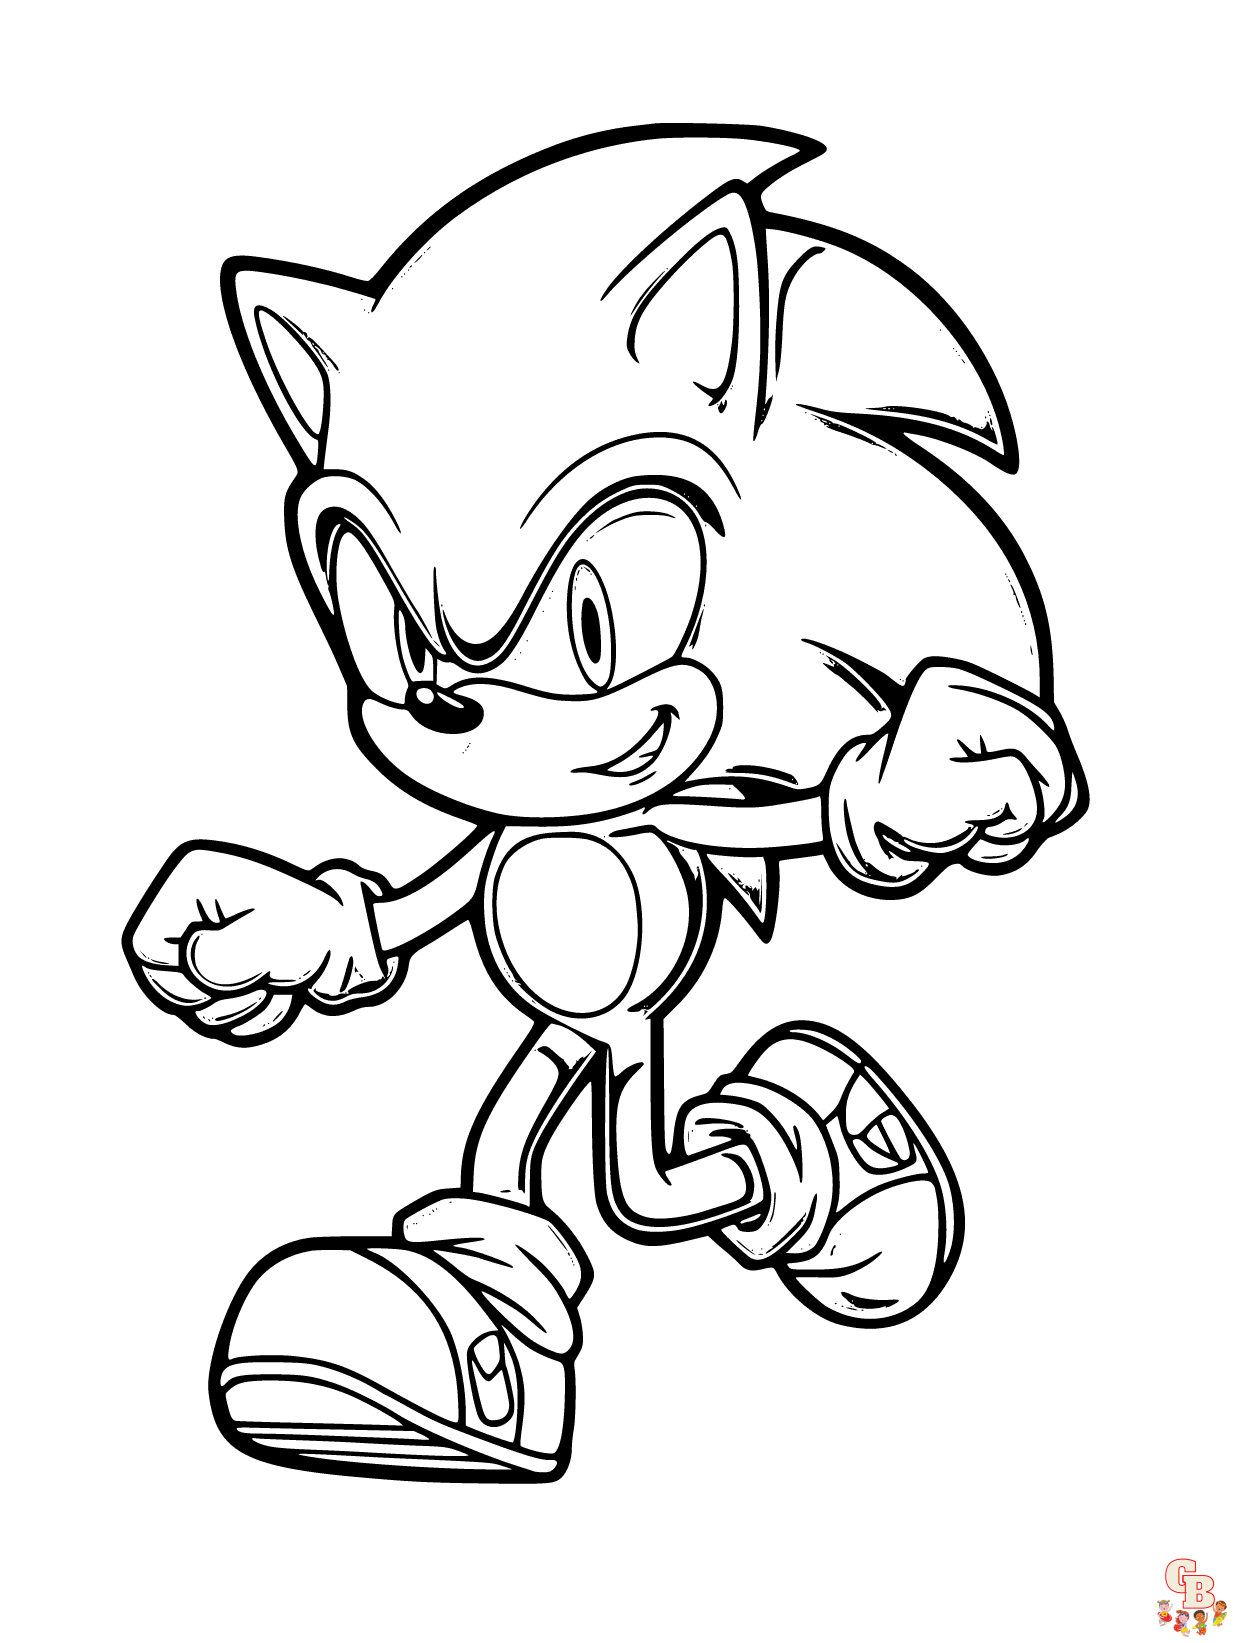 Dark Sonic Coloring Pages  Coloring pages, Cartoon coloring pages